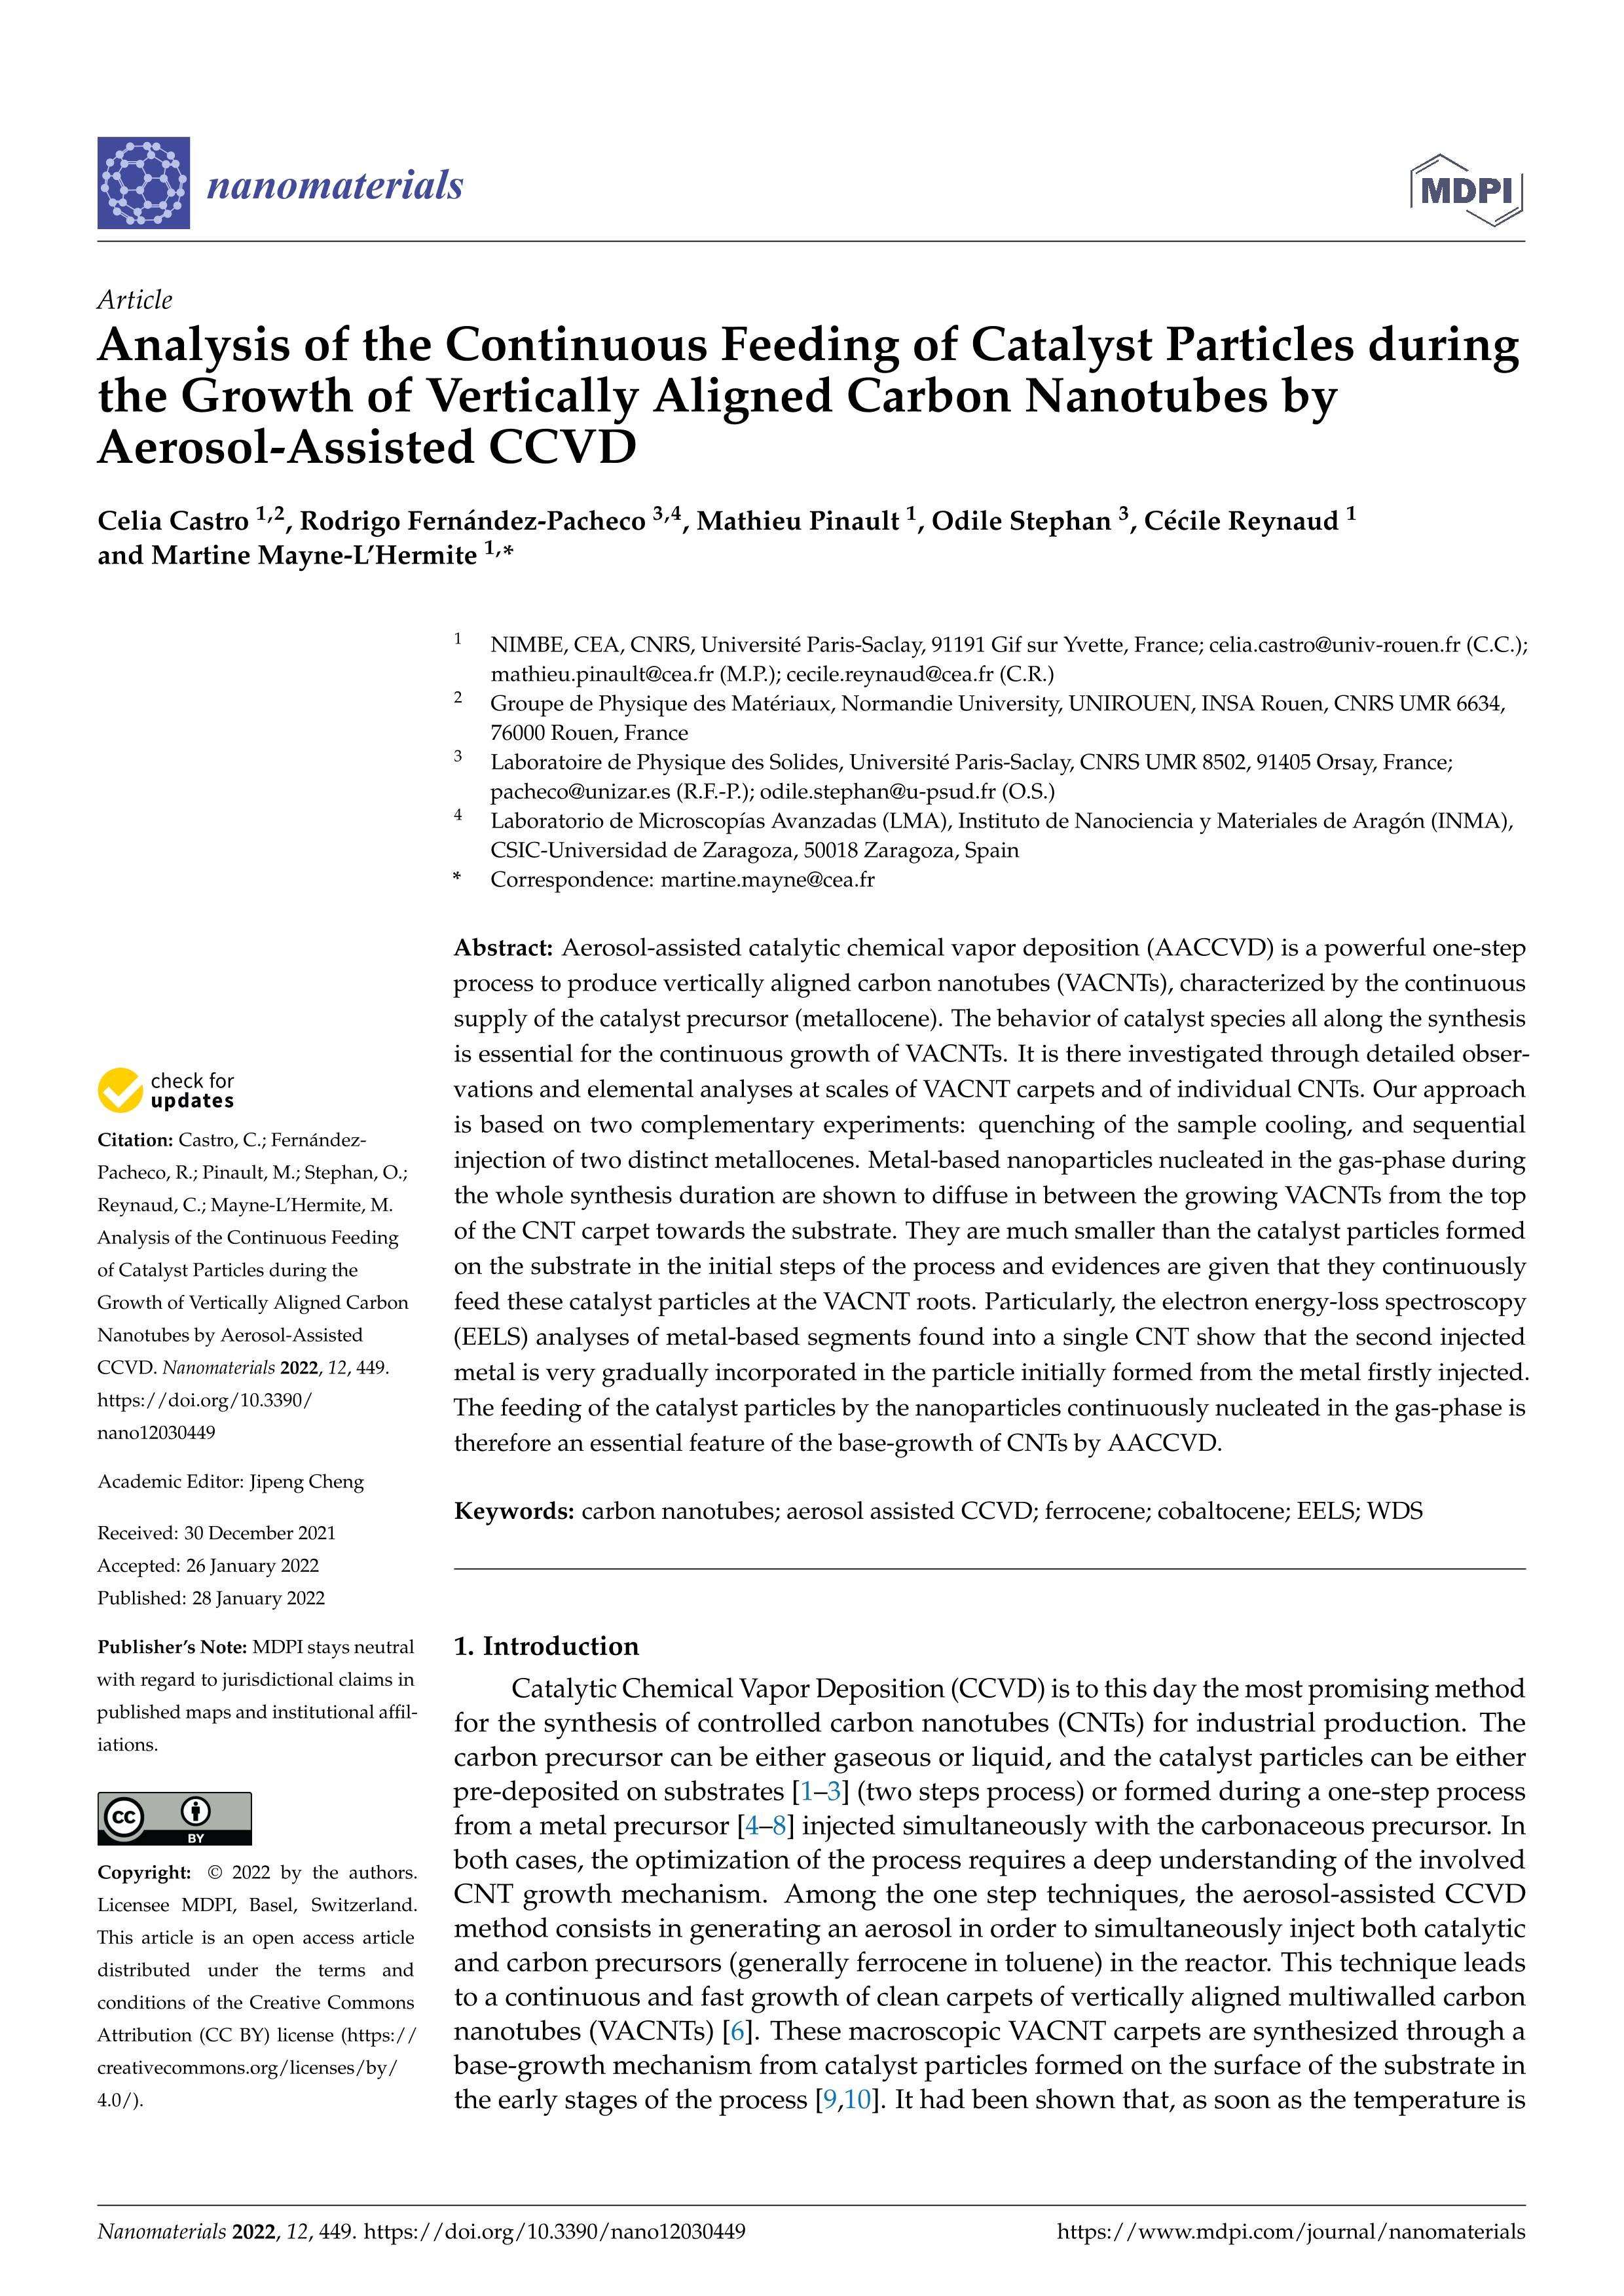 Analysis of the continuous feeding of catalyst particles during the growth of vertically aligned carbon nanotubes by aerosol-assisted CCVD